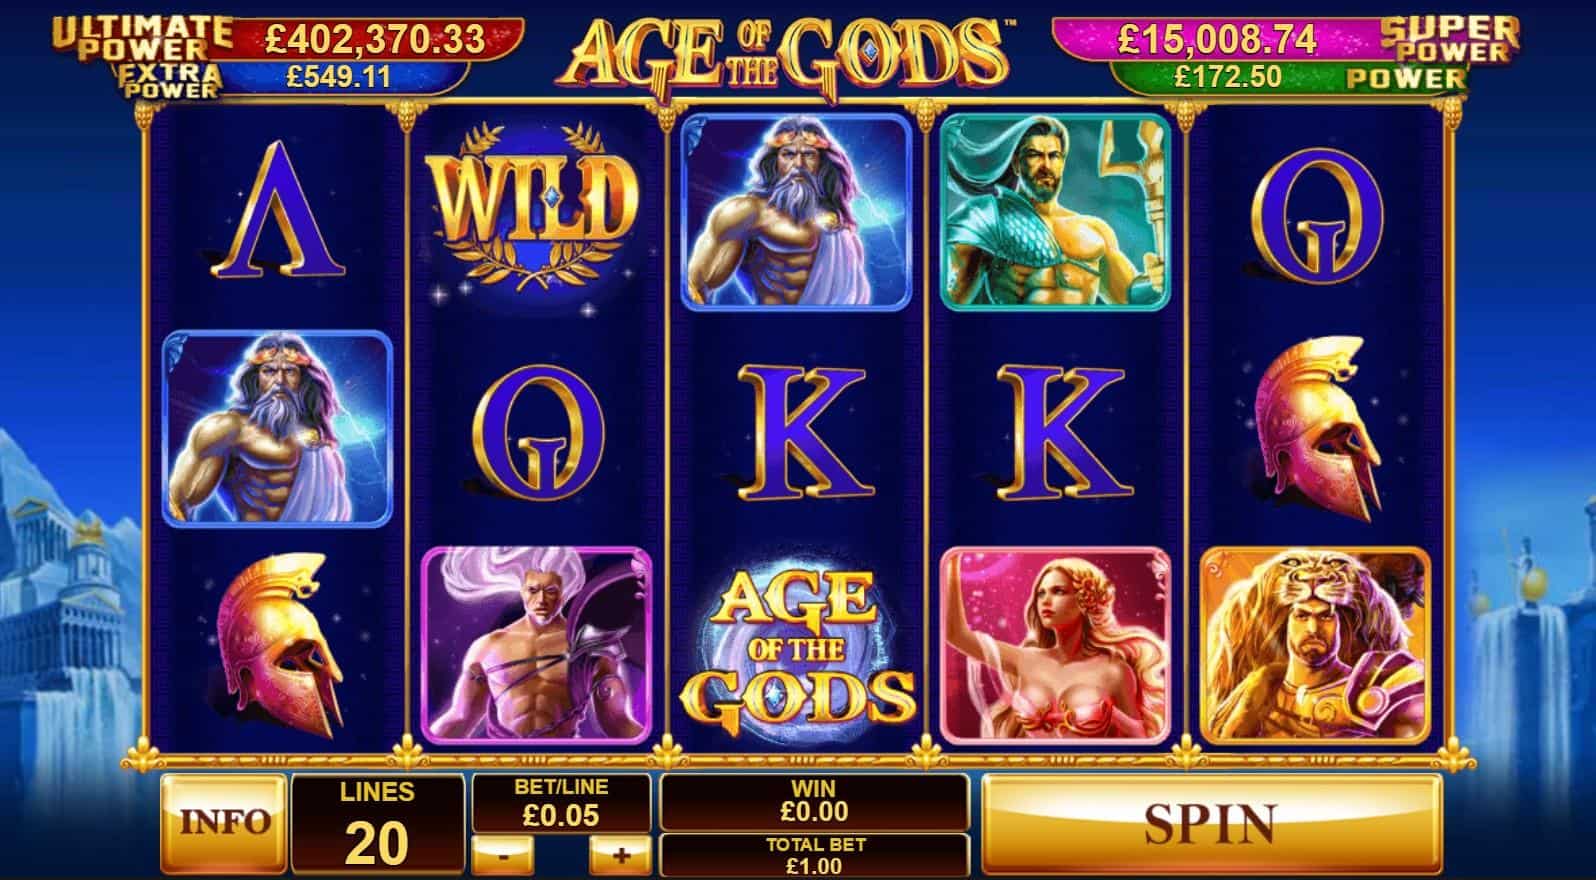 The Original Age of The Gods Slot Game by Playtech